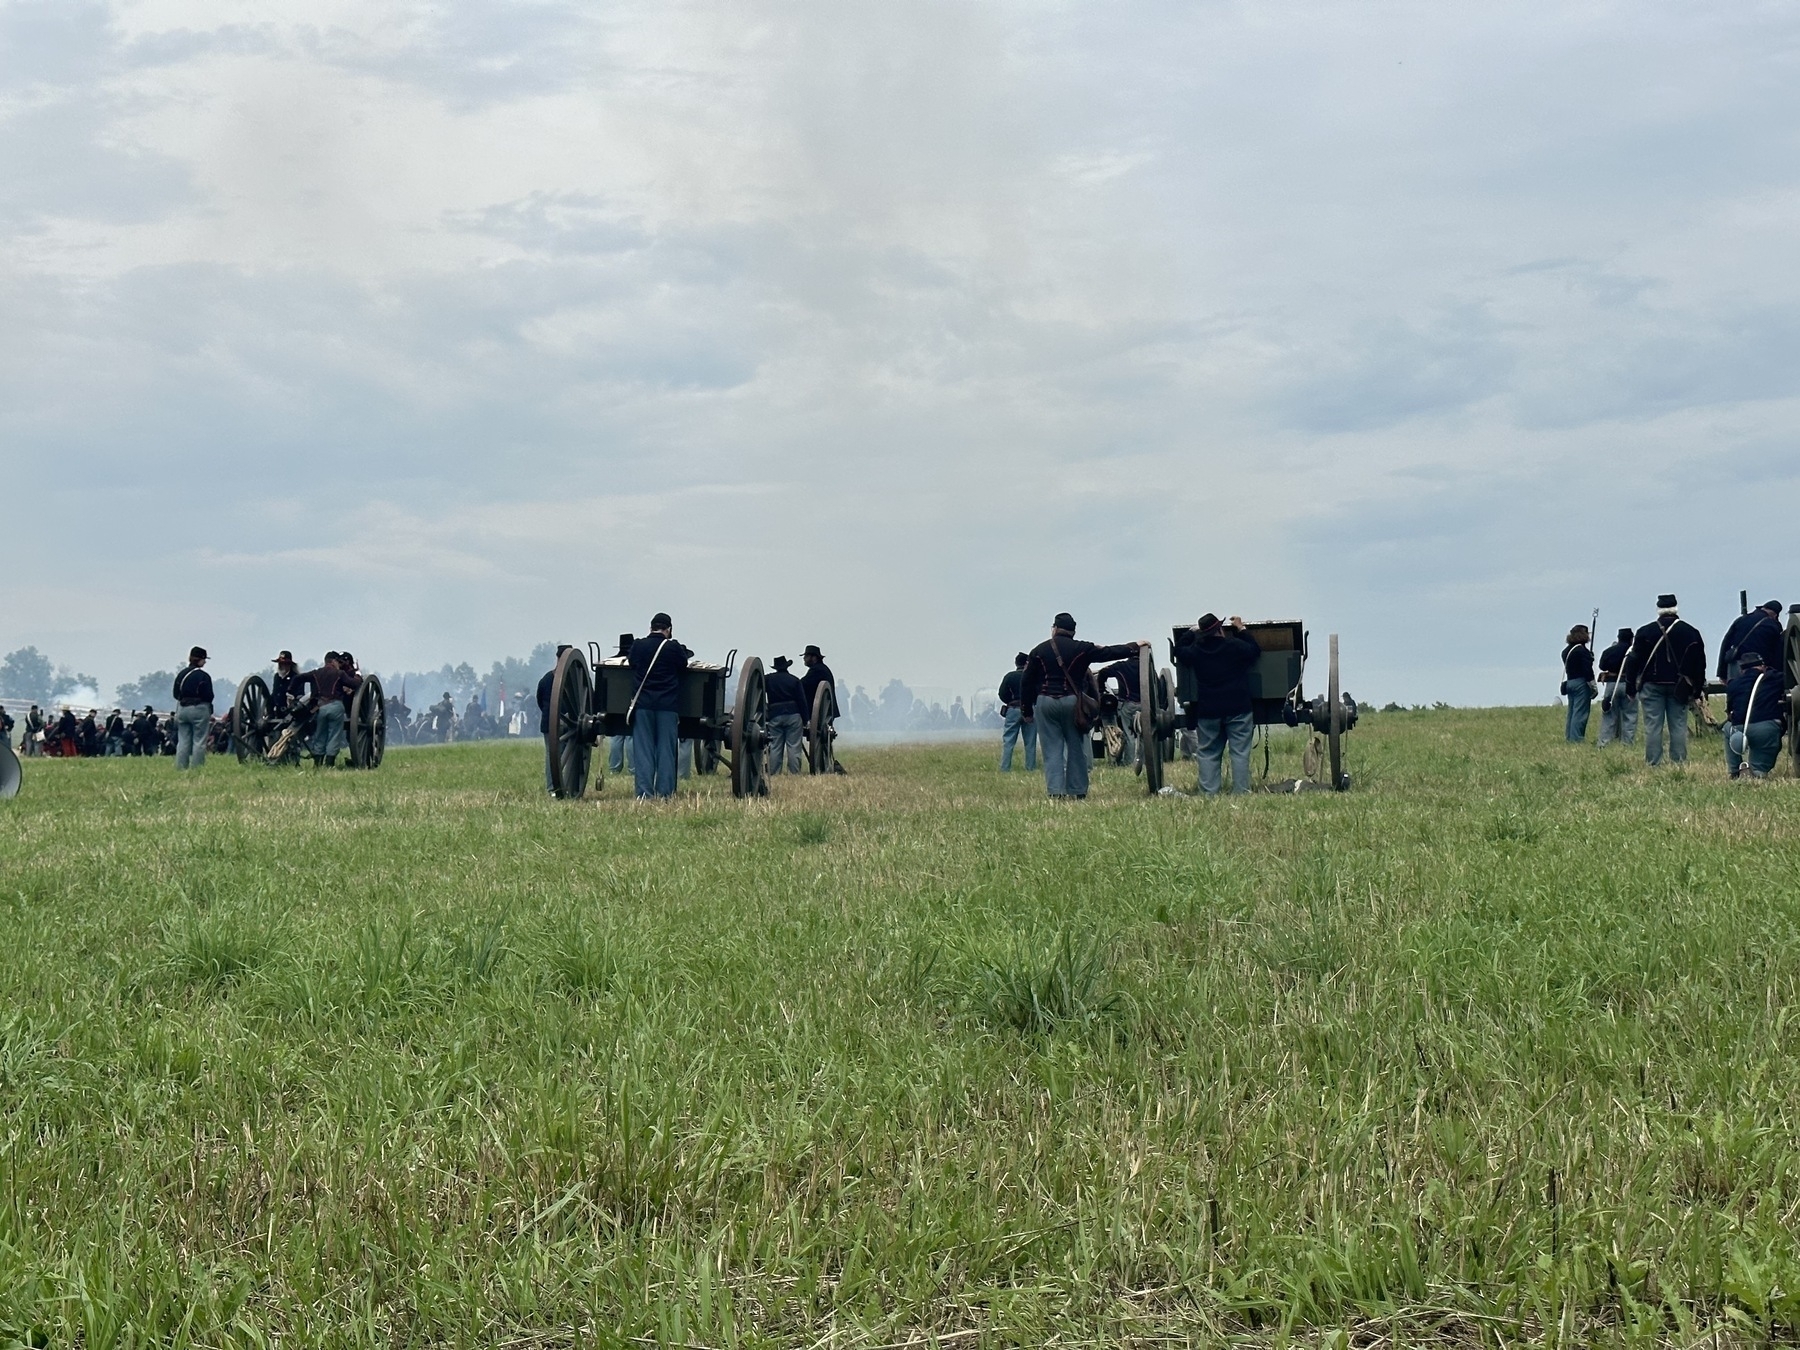 160th Battle of Gettysburg Anniversary Event - soliders reenacting Kemper's Assault during Pickett's Charge